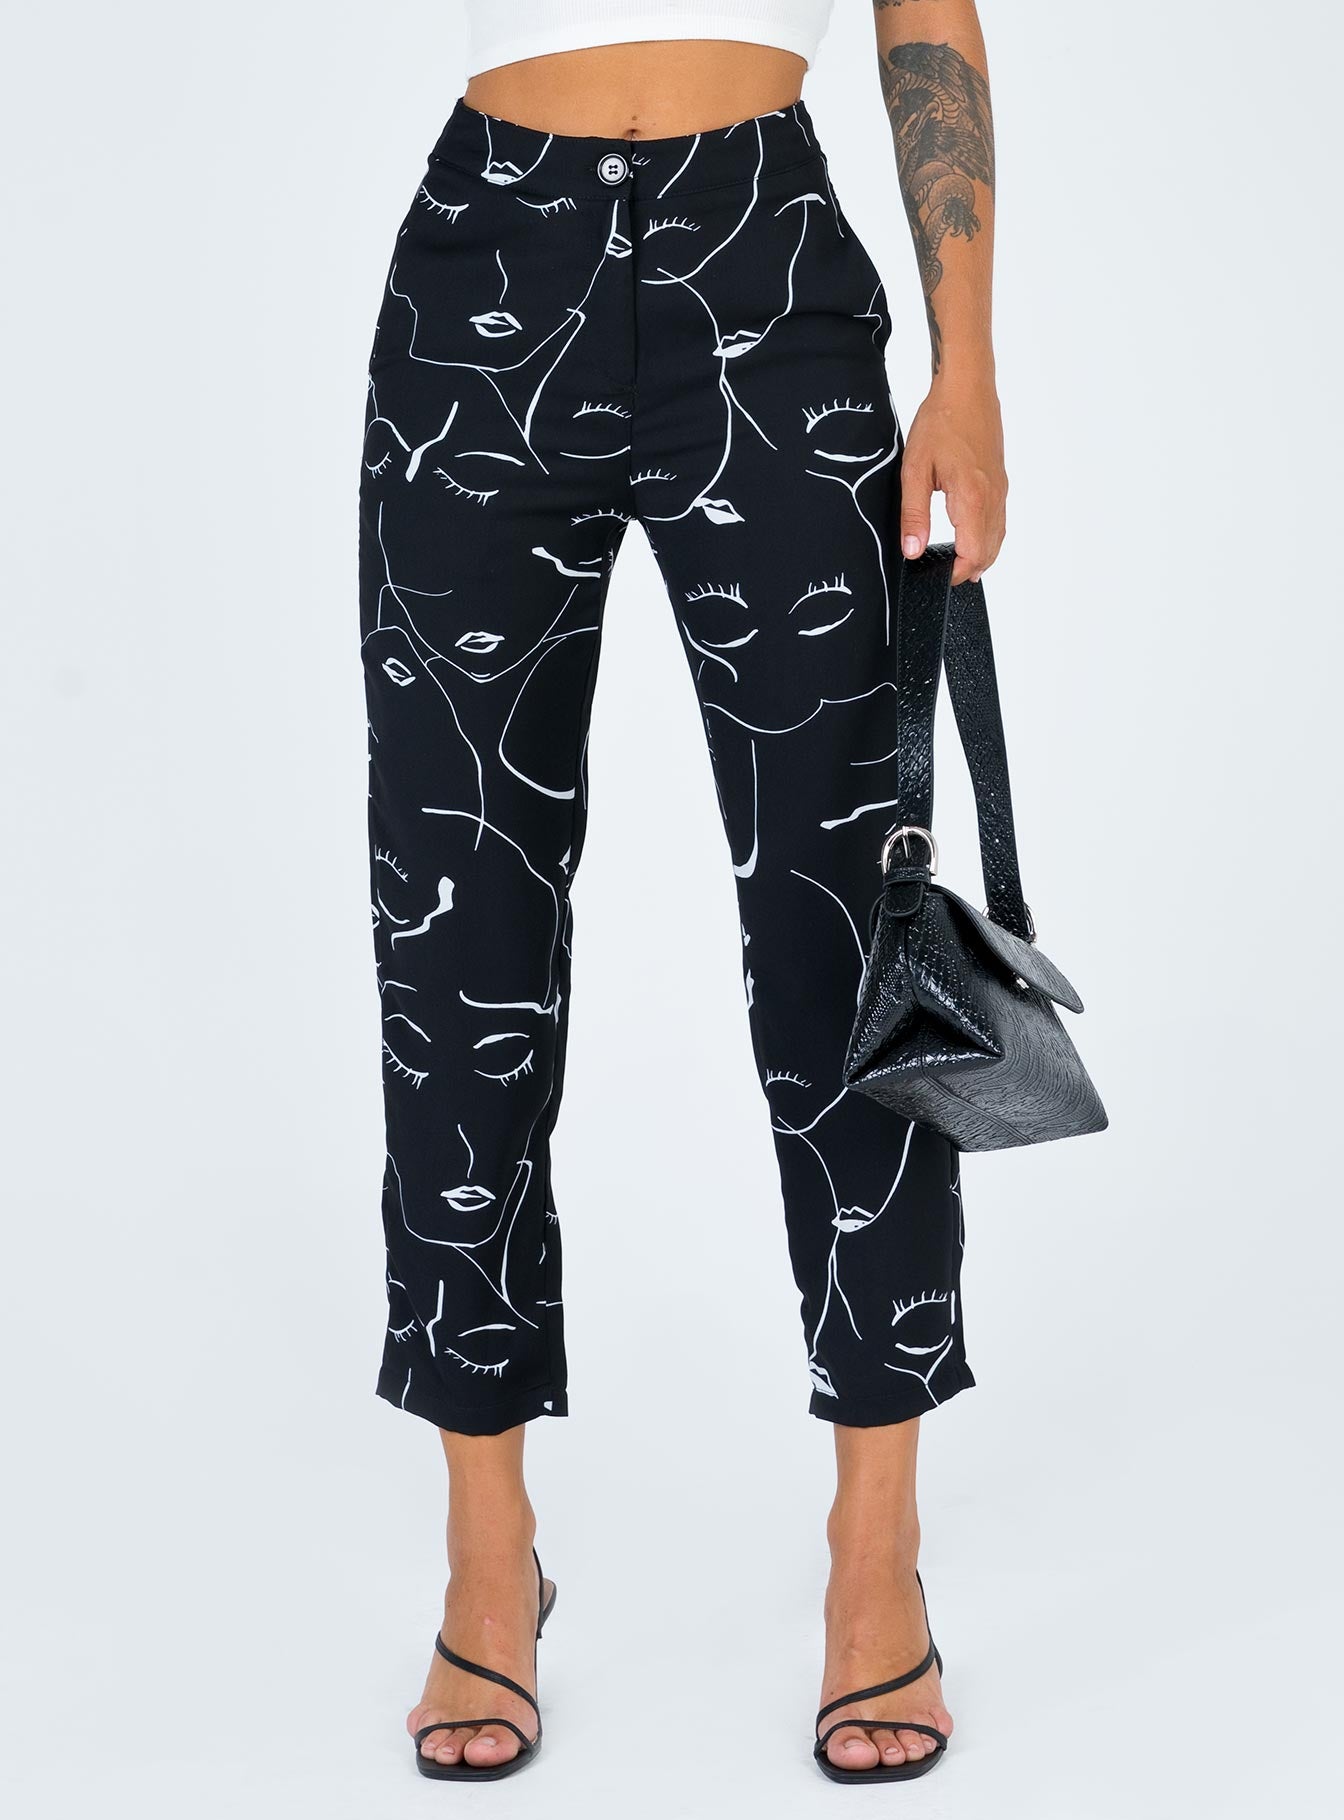 face on pants